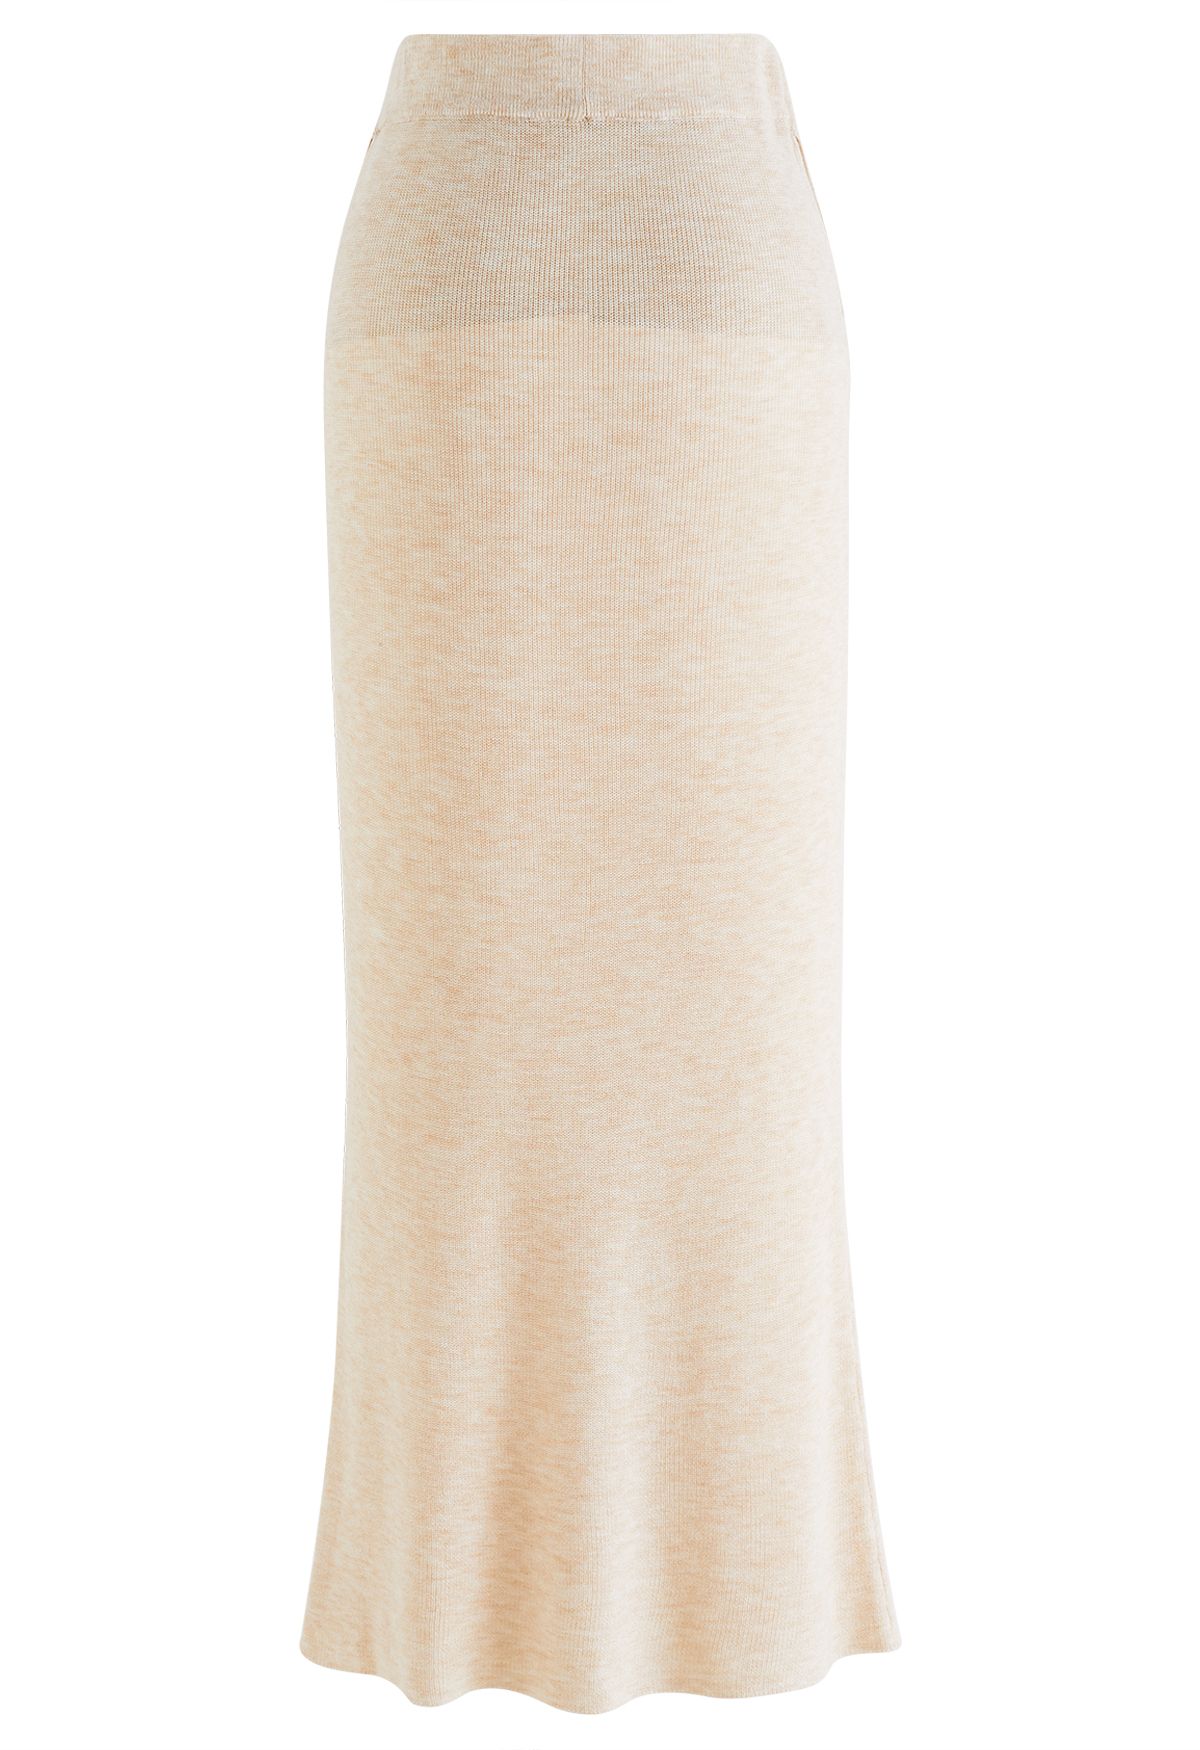 Knitted High Waist Pencil Maxi Skirt in Apricot